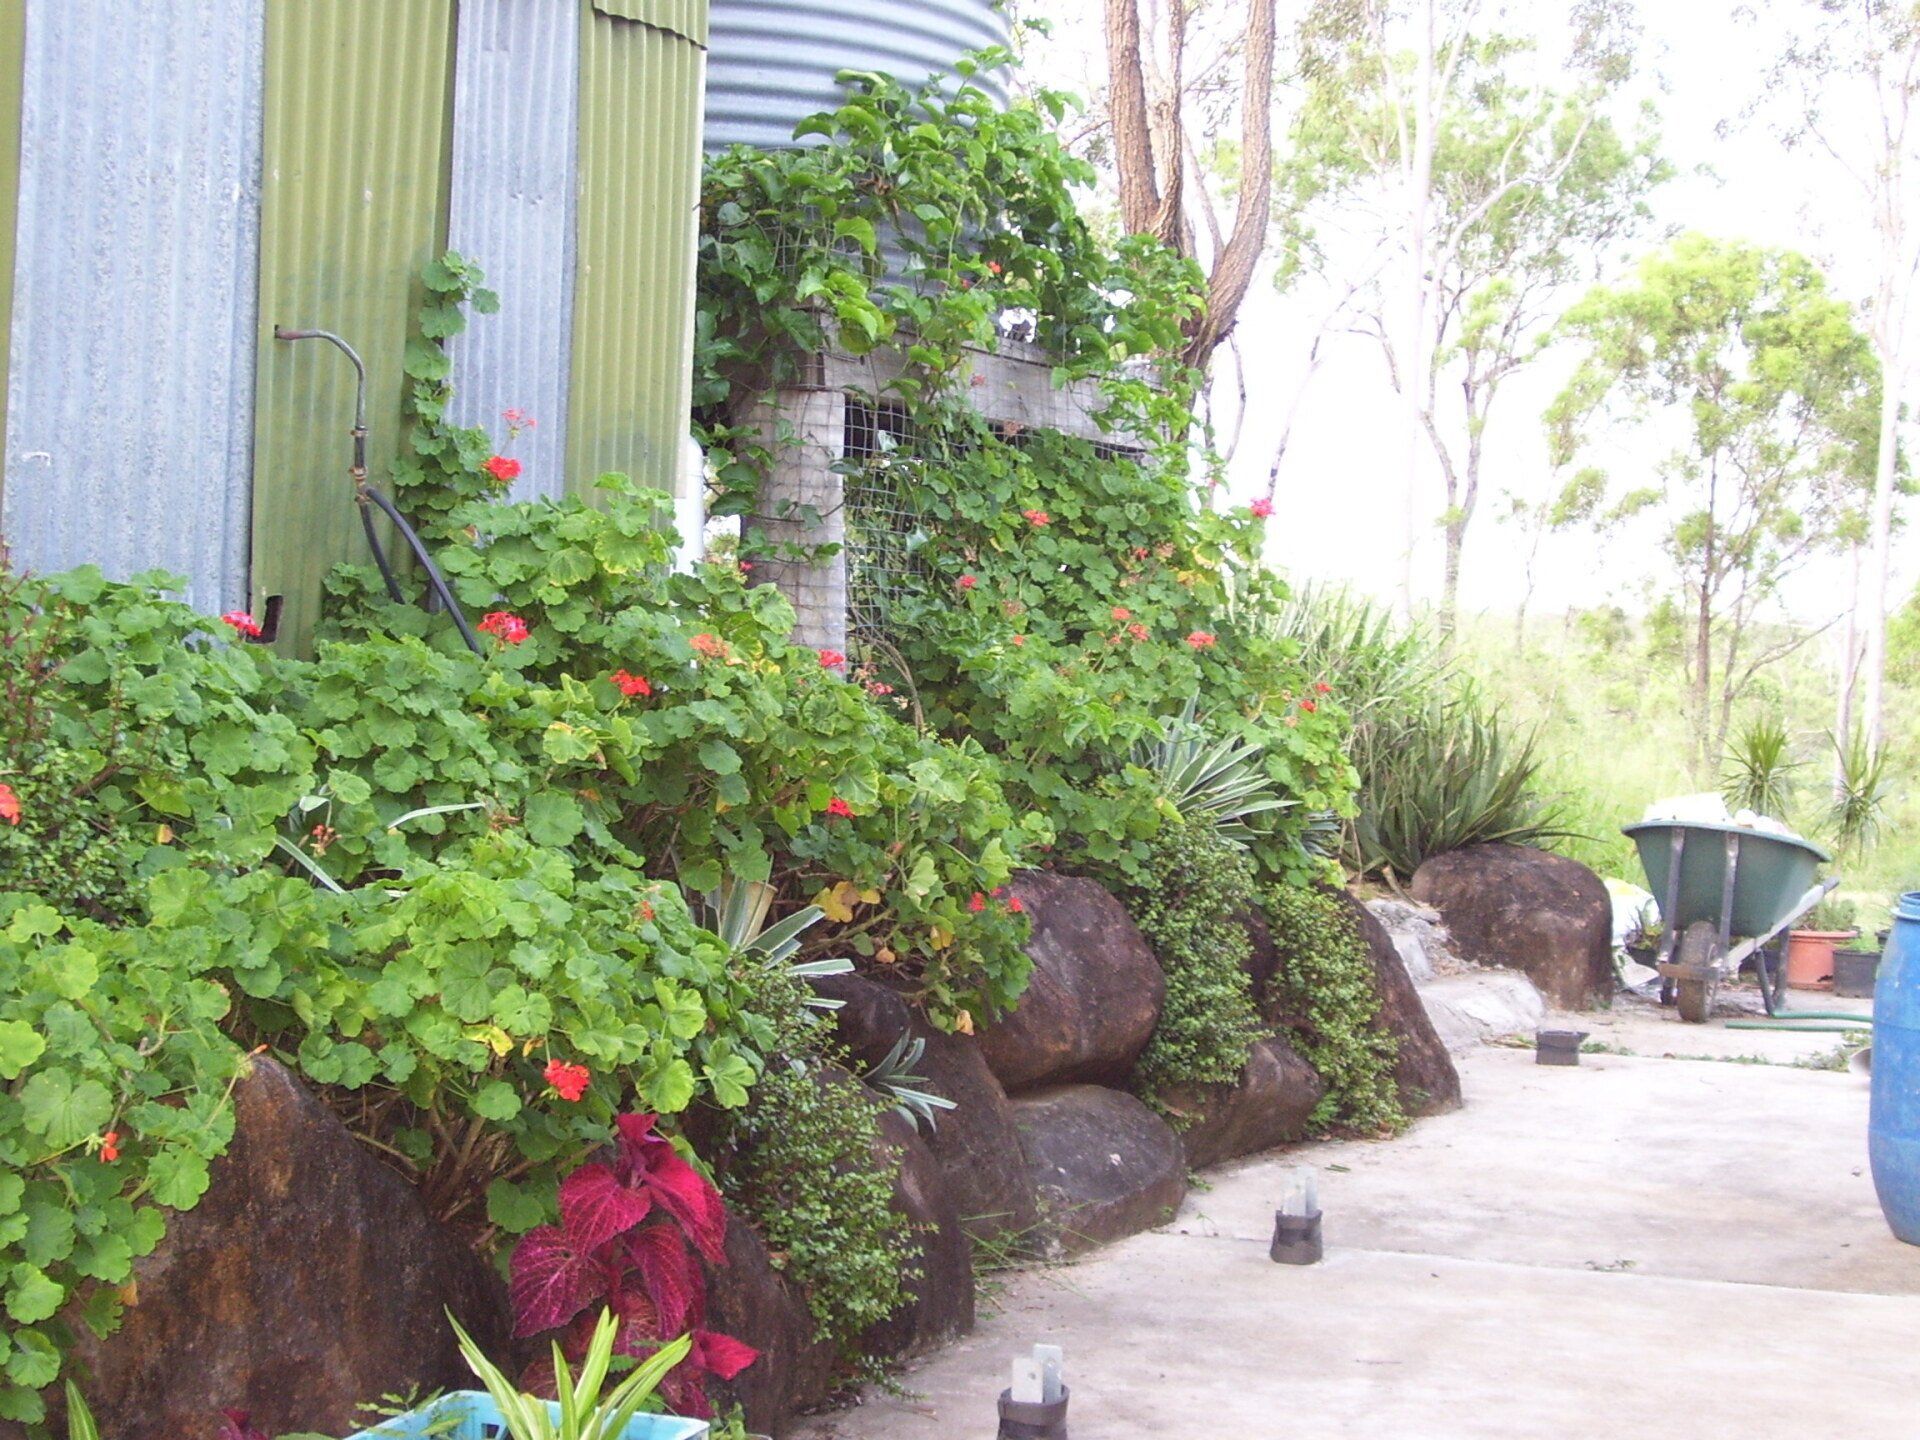 Rock Surround by Plants — A1 Rock This City Truck & Dog Hire In Good Night QLD